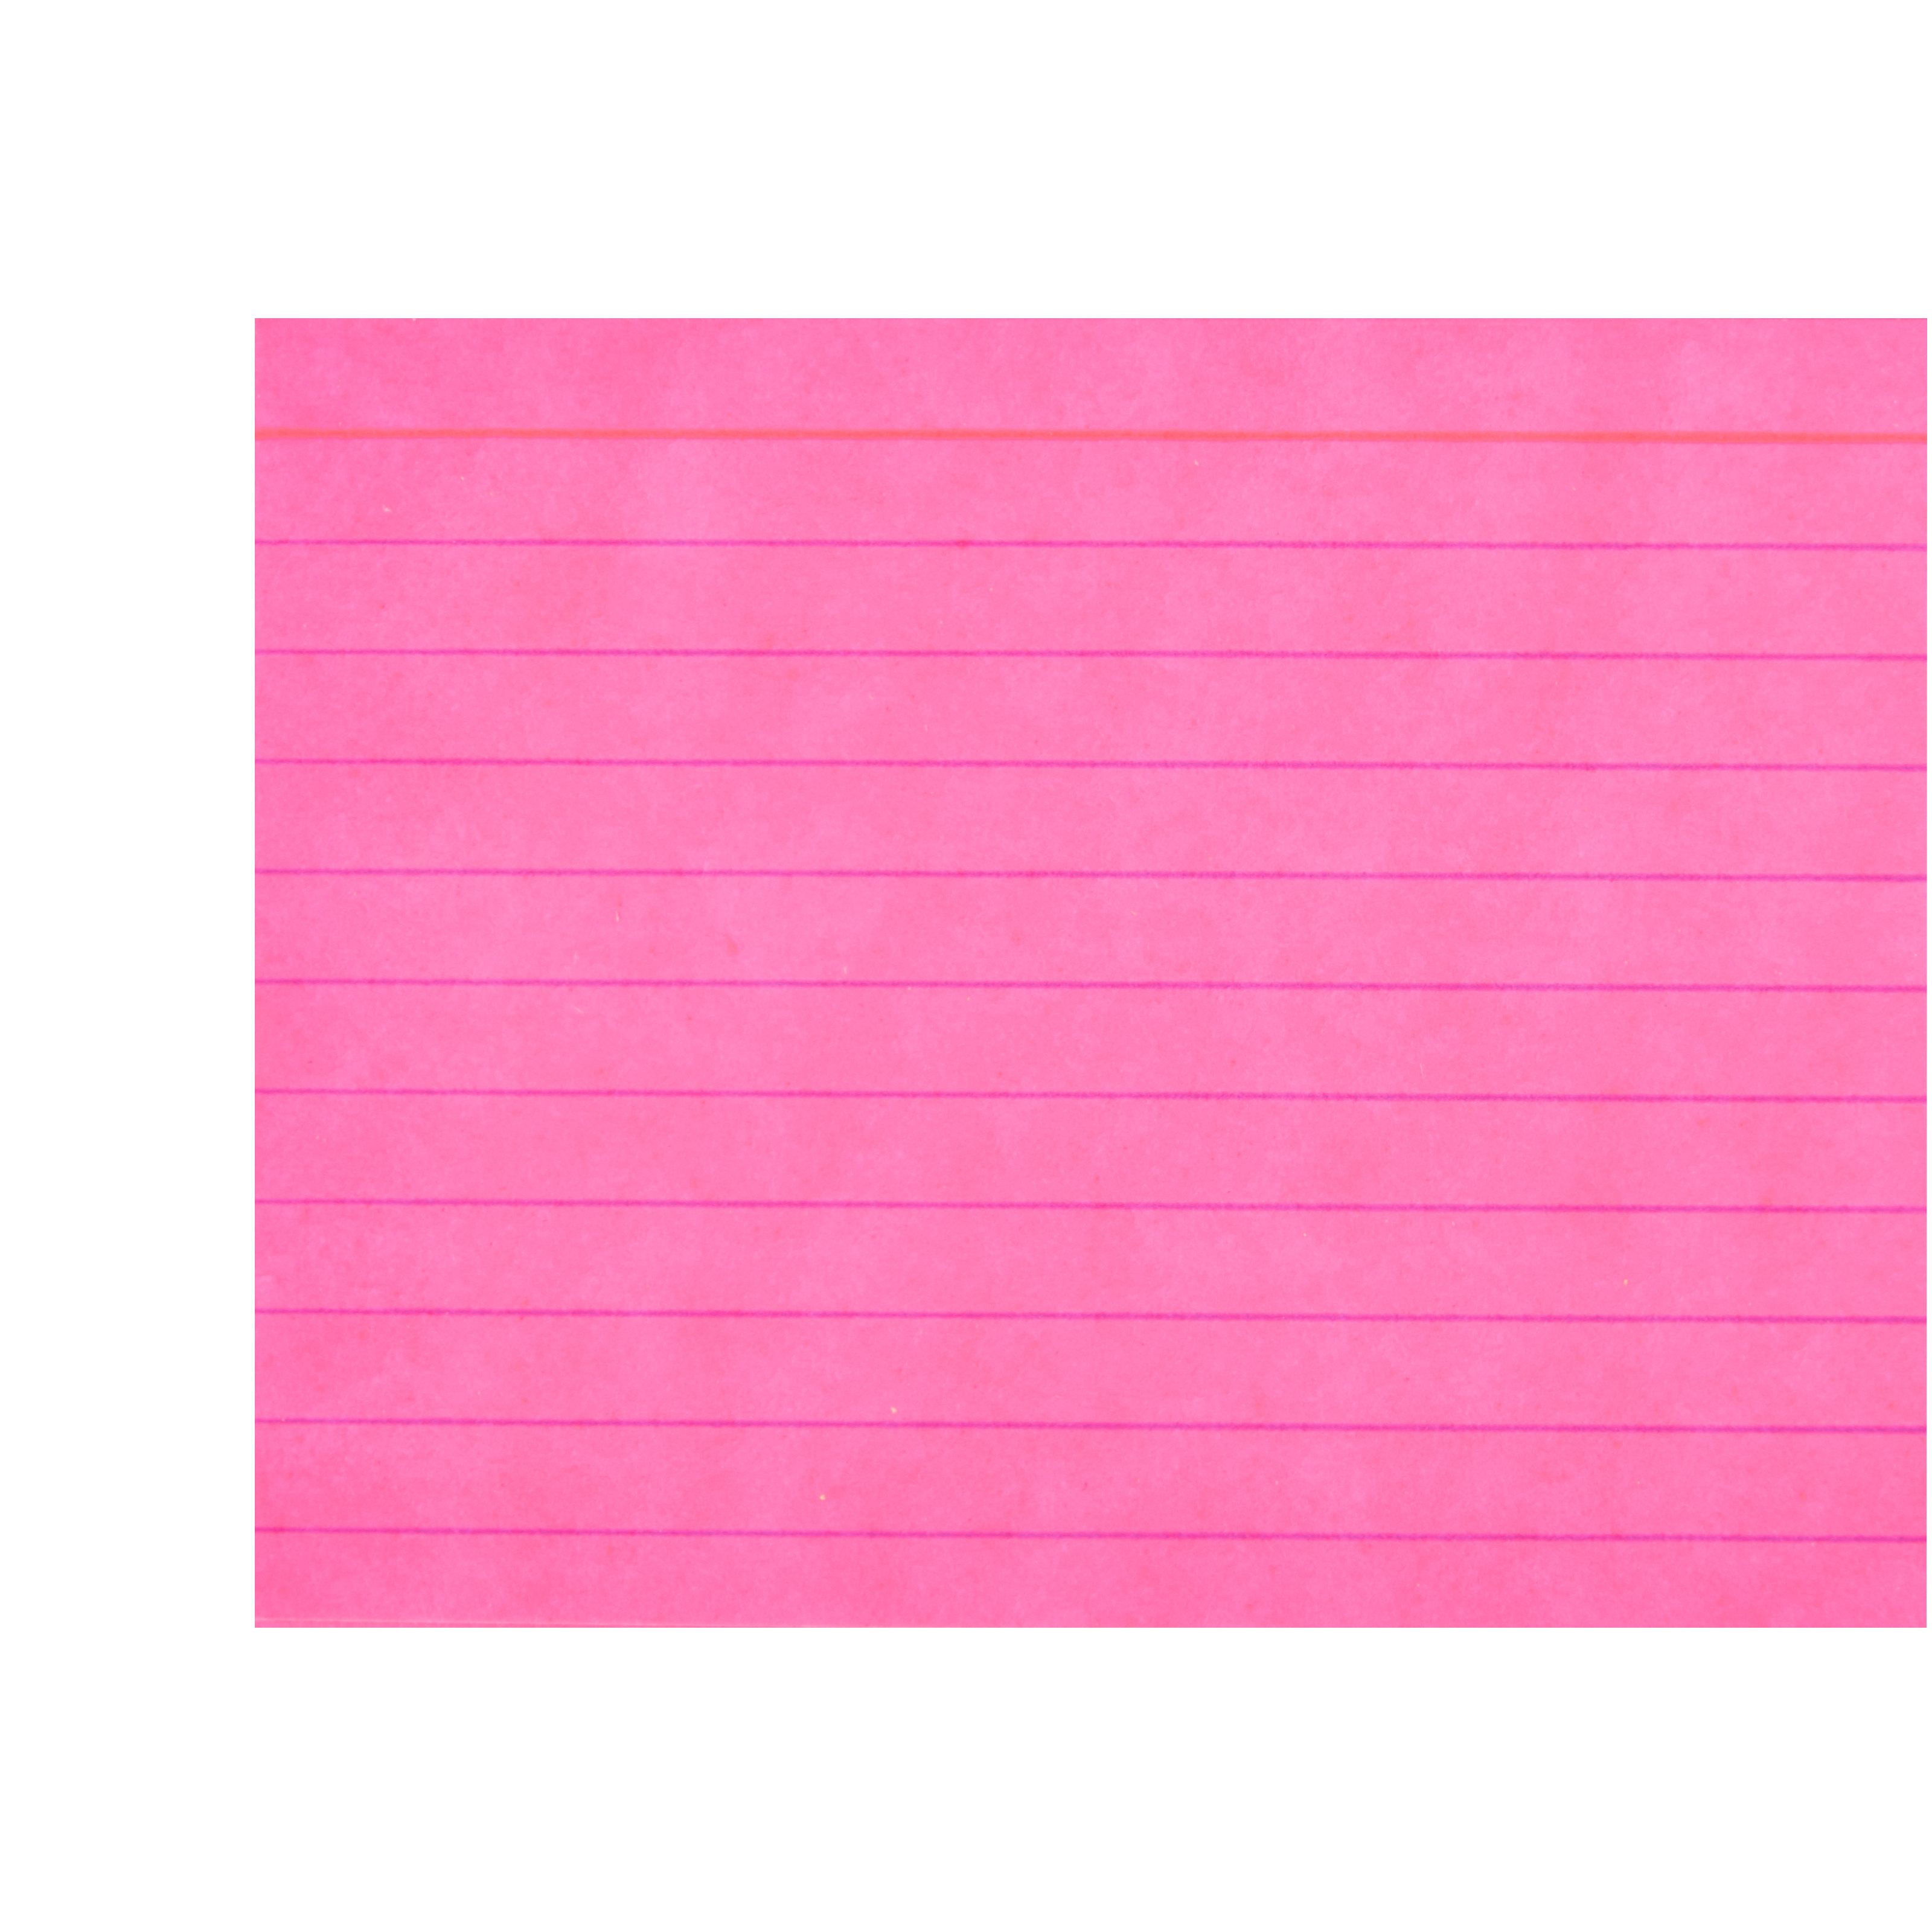 Pen + Gear Ruled Index Cards, Neon Assorted Colors, 300 Count, 3 x 5